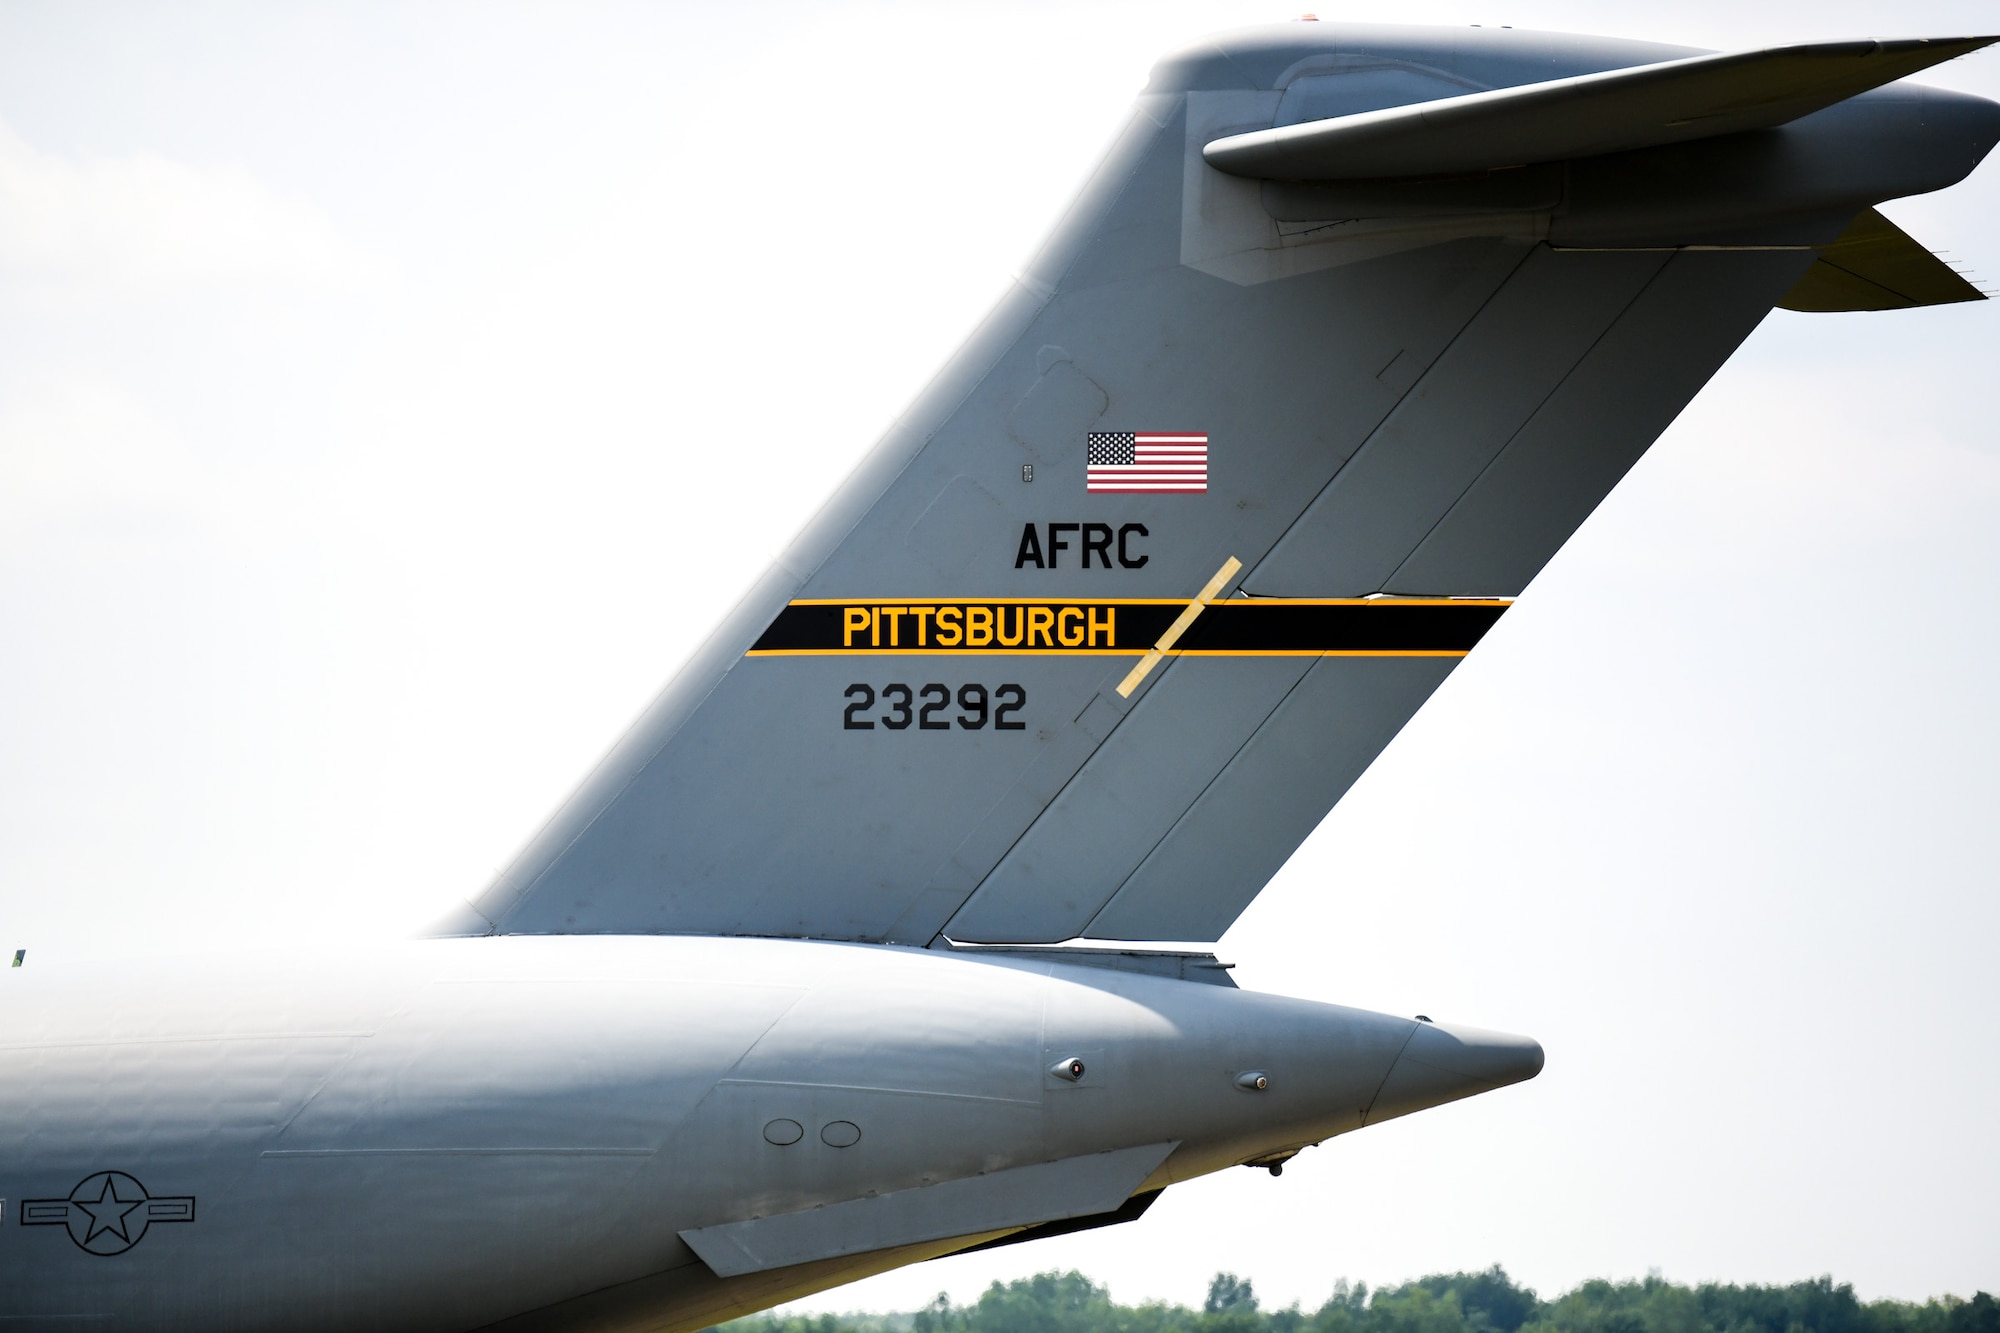 A trio of C-17 aircraft from Pittsburgh Air Reserve Station, Pennsylvania, was one of a trio of aircraft making use of the local runway and uncongested airspace for training.